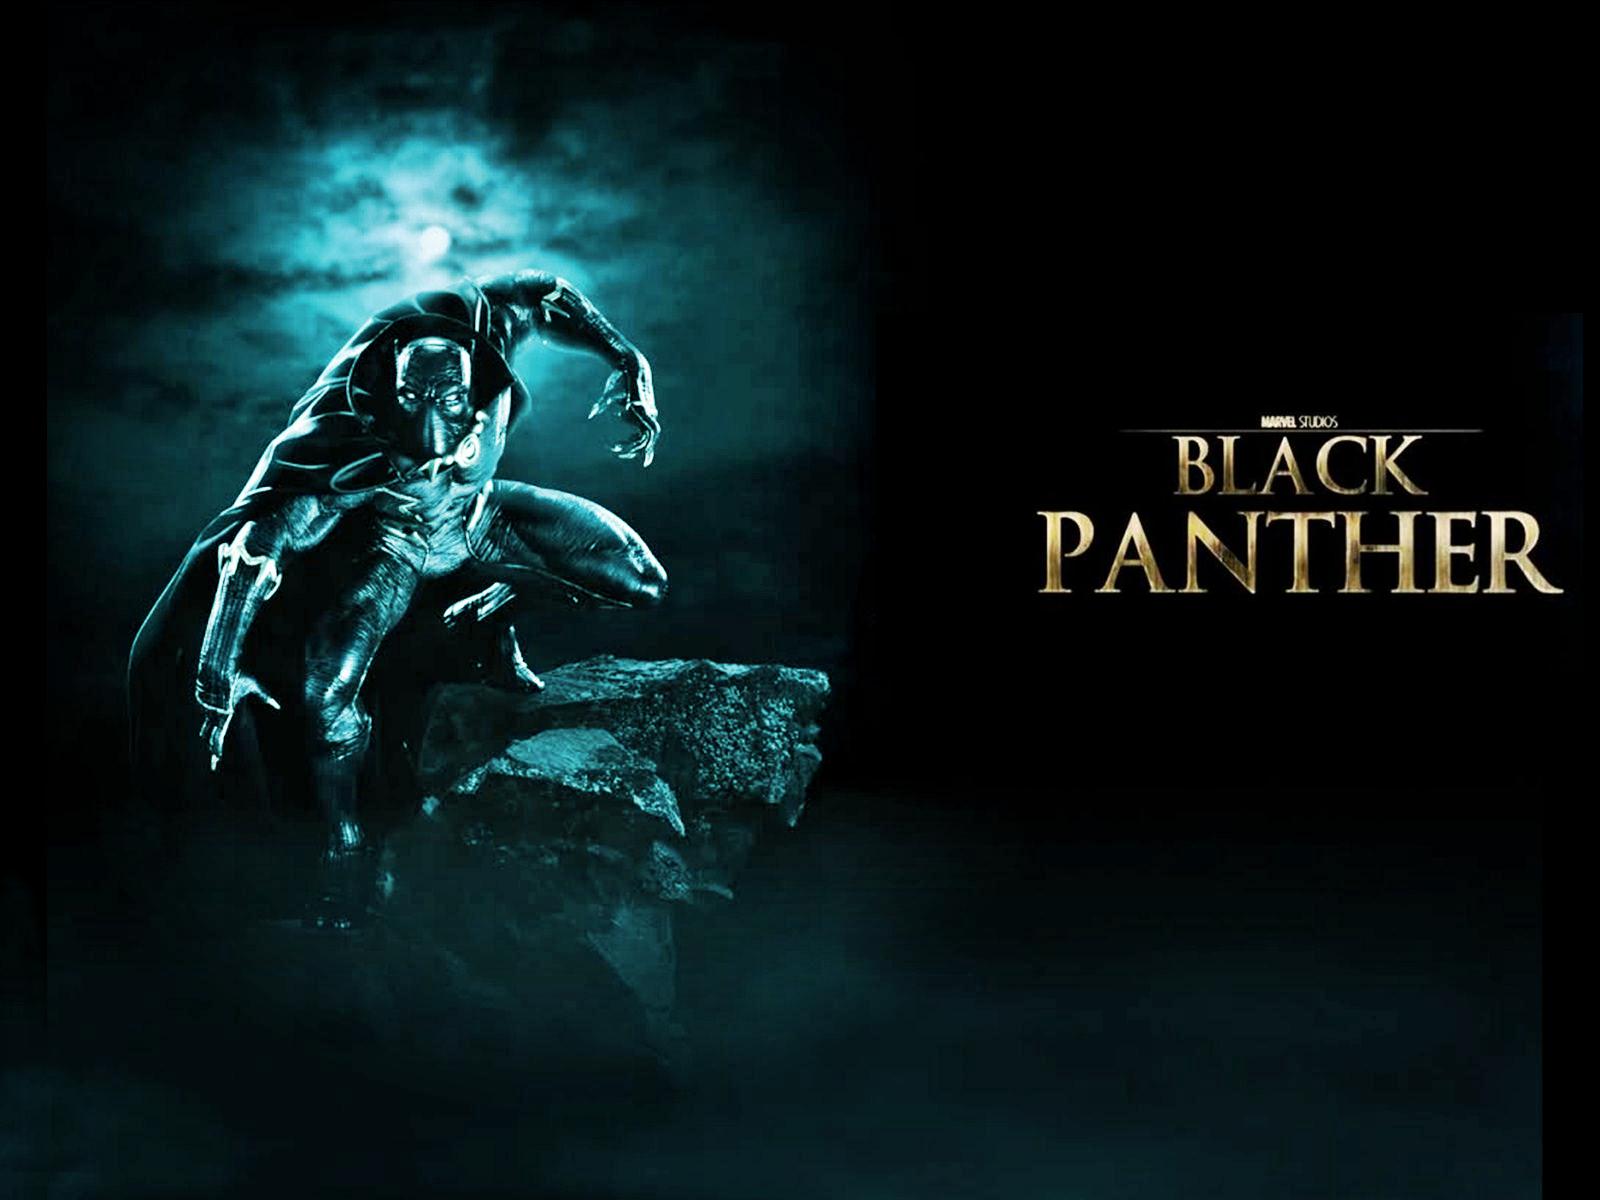  commarvel black panther 2017 movie coming hd wallpaperhtml